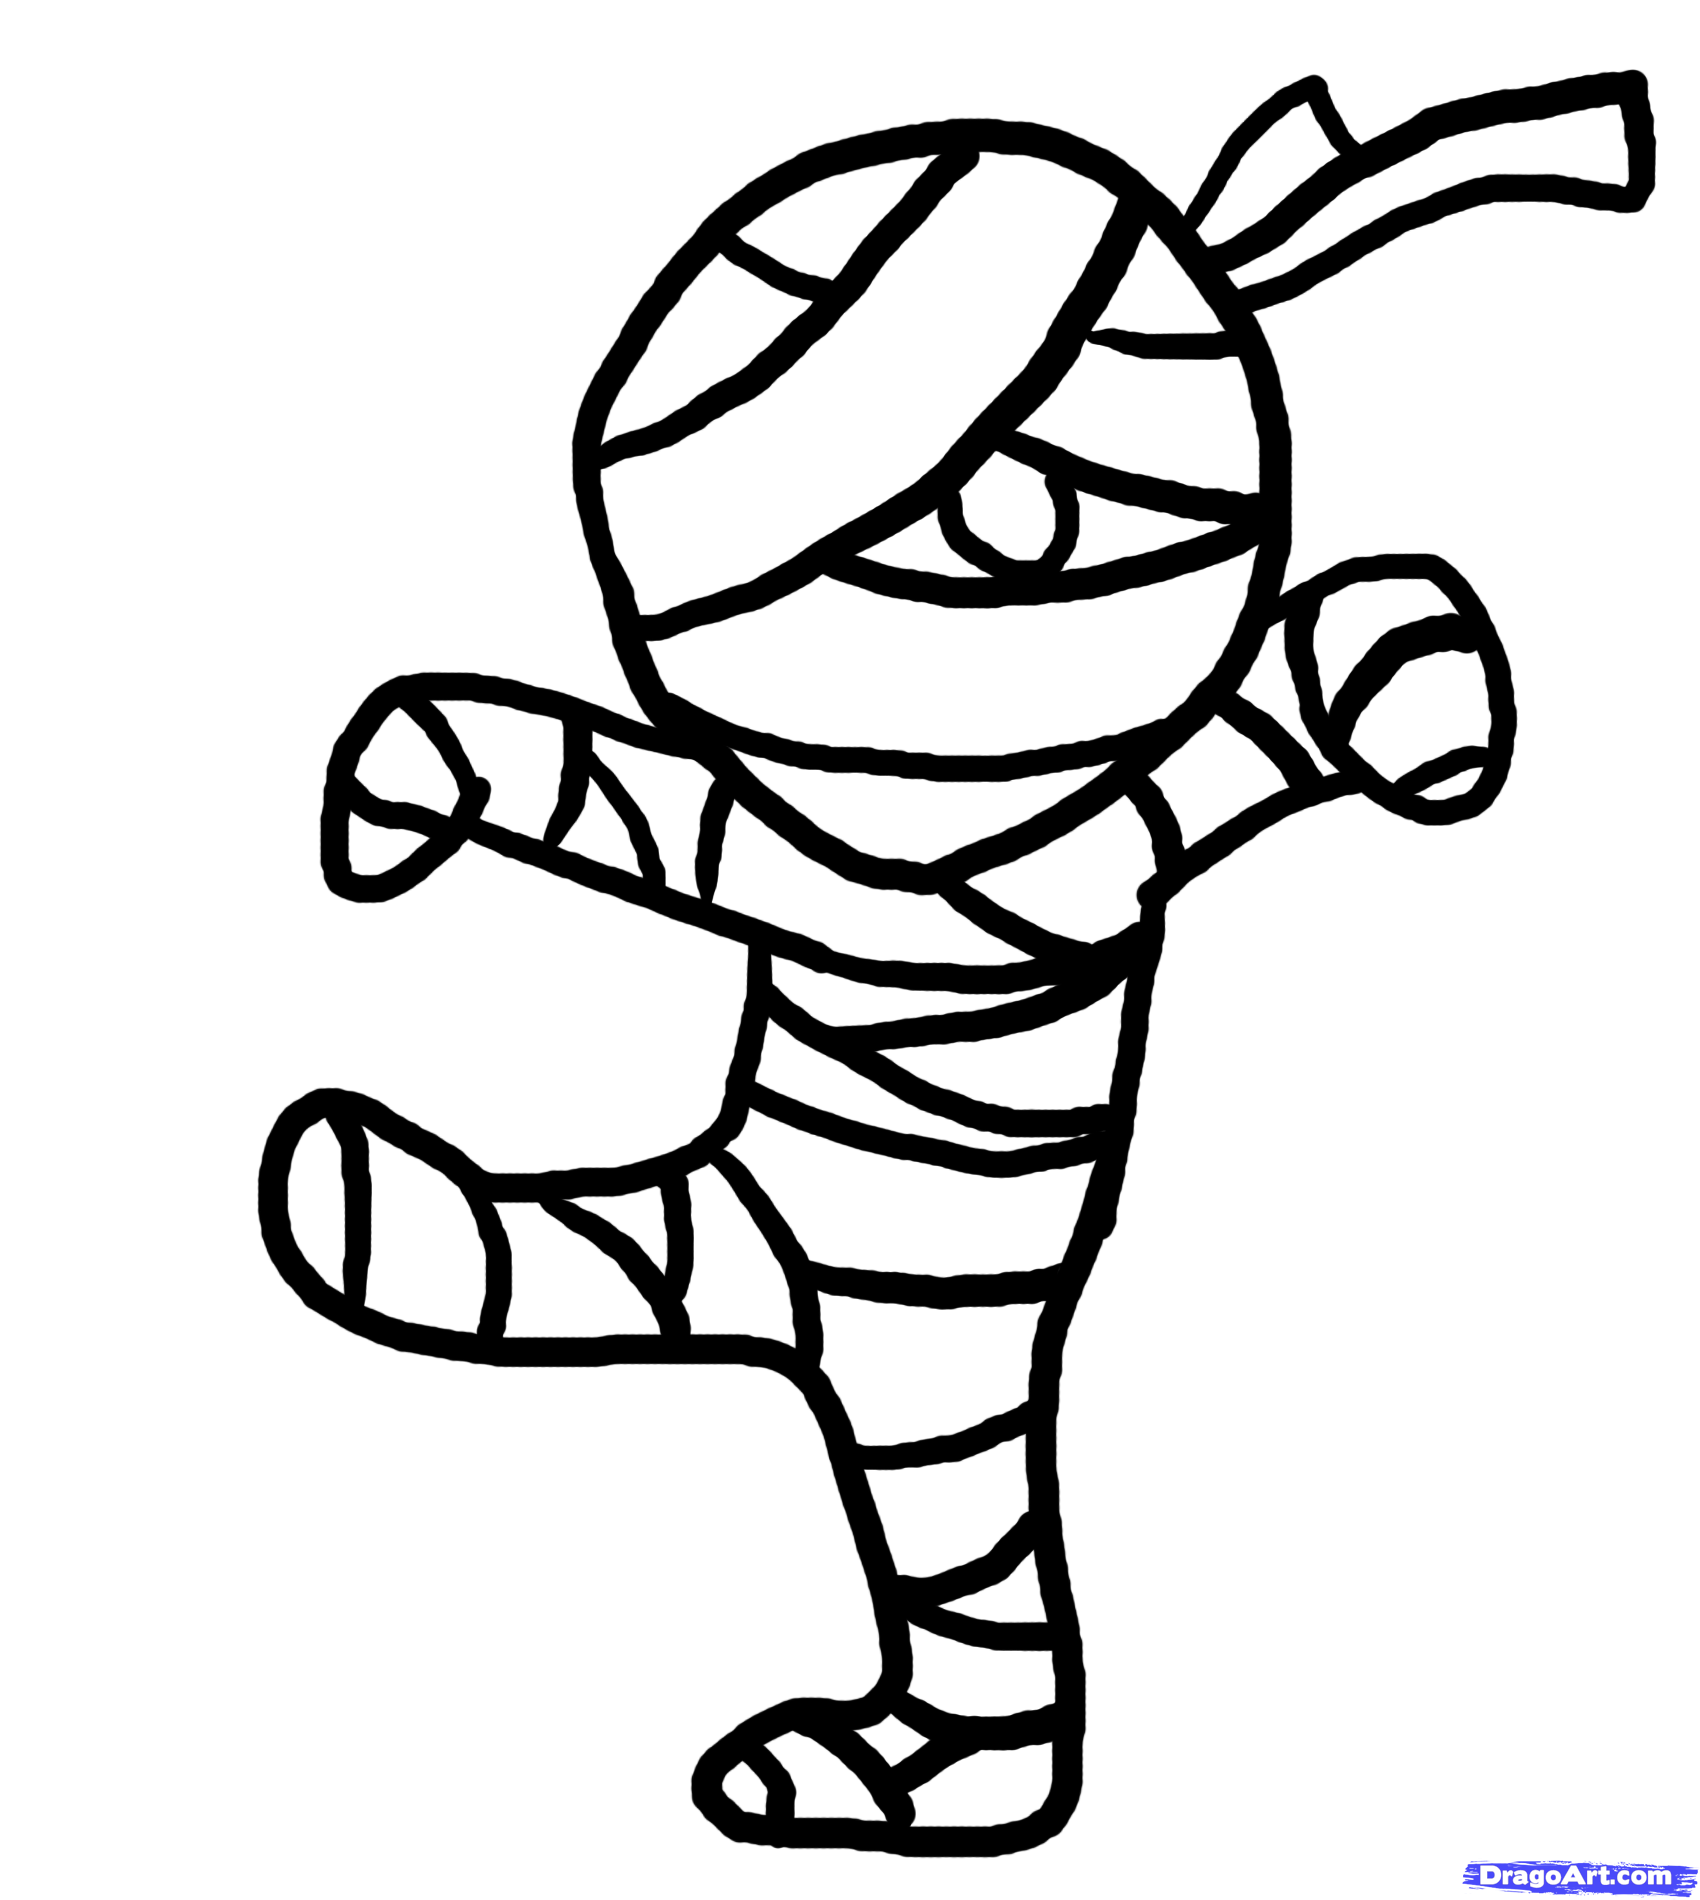 Mummy clipart free download clip art on